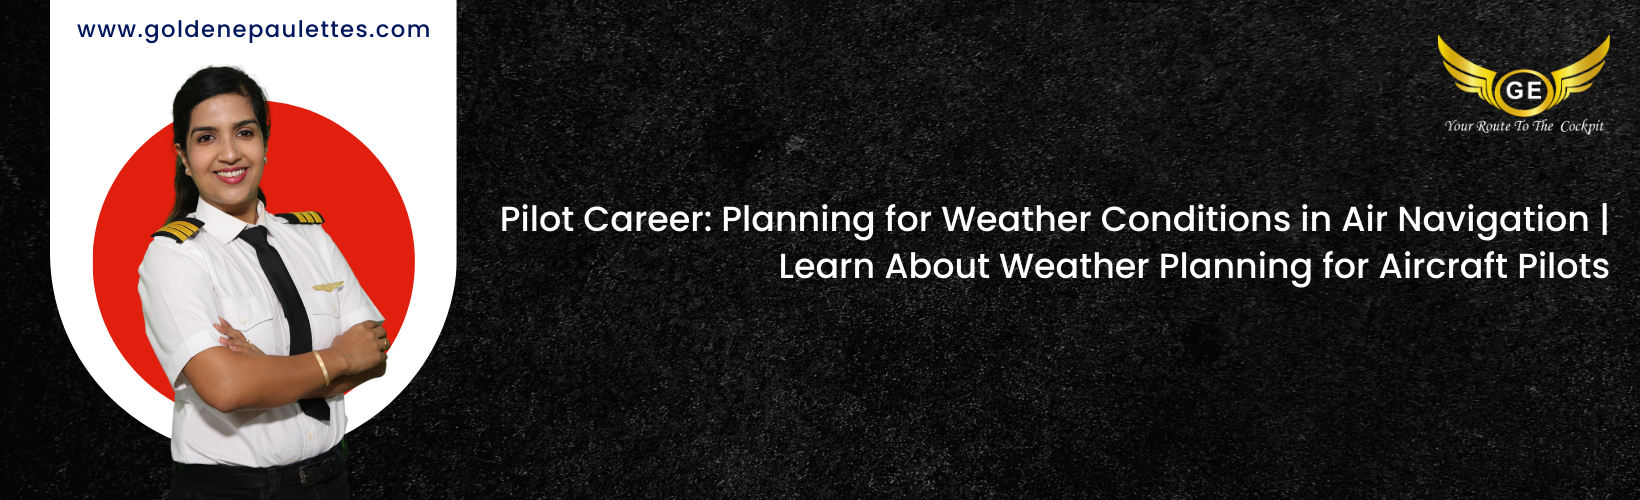 Weather Planning in Air Navigation